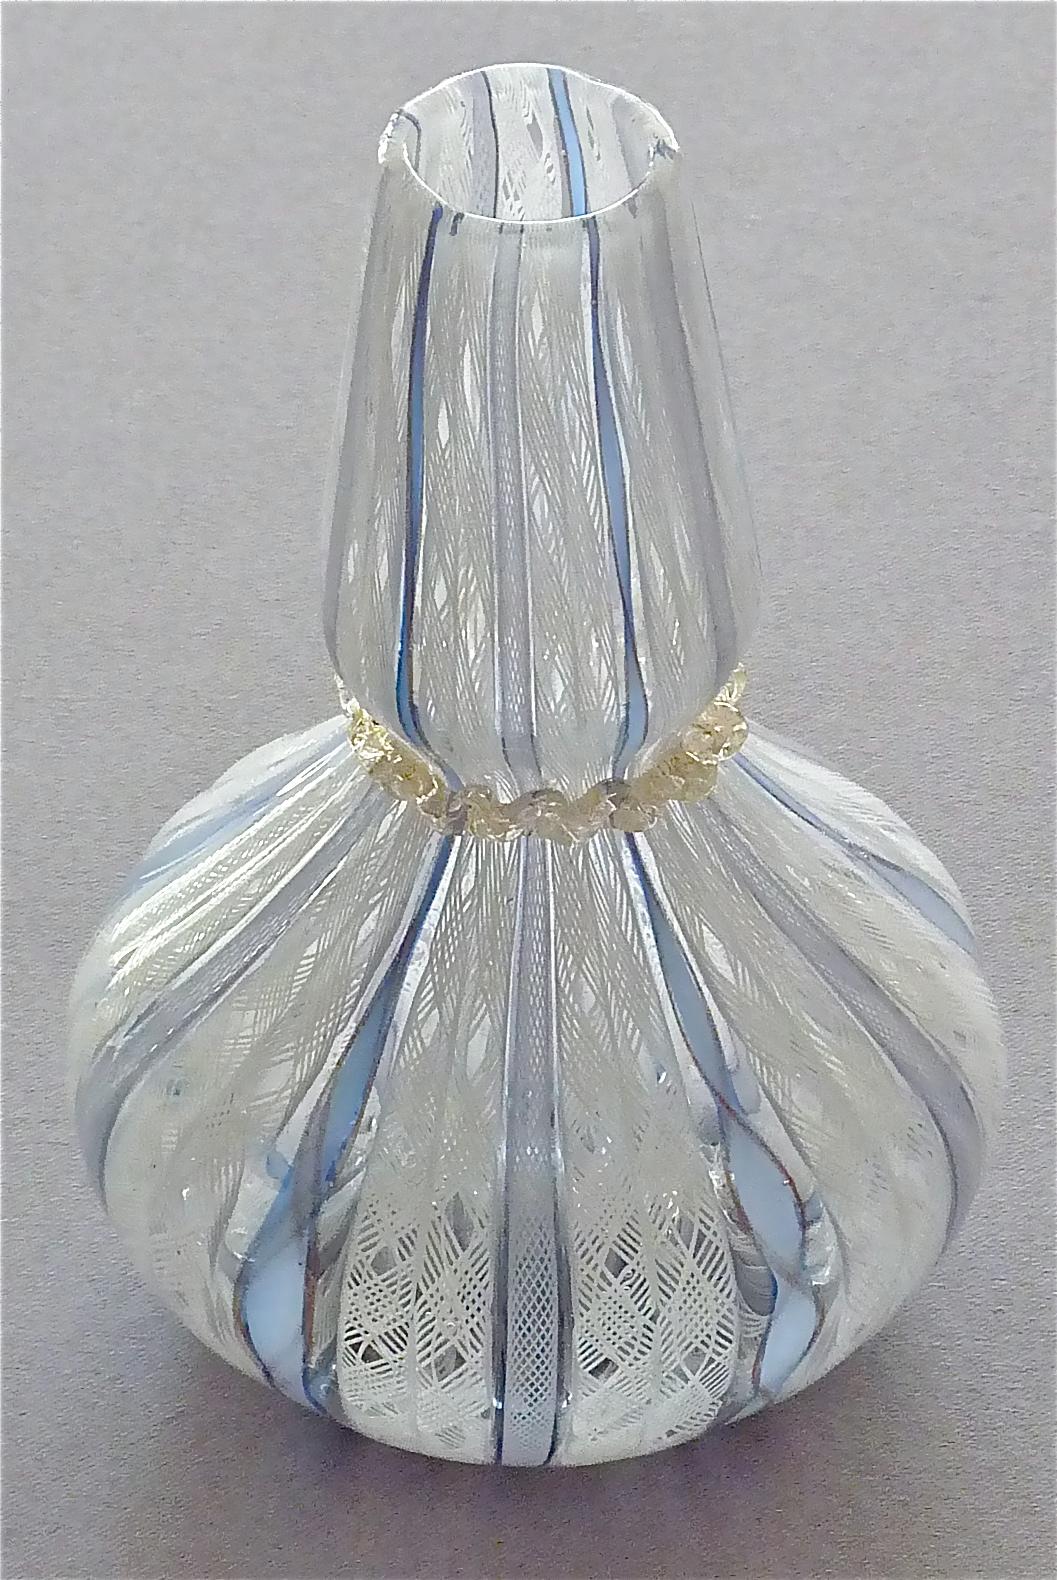 Dino Martens Vase for Aureliano Toso White Blue Murano Art Glass, Italy, 1950s For Sale 8